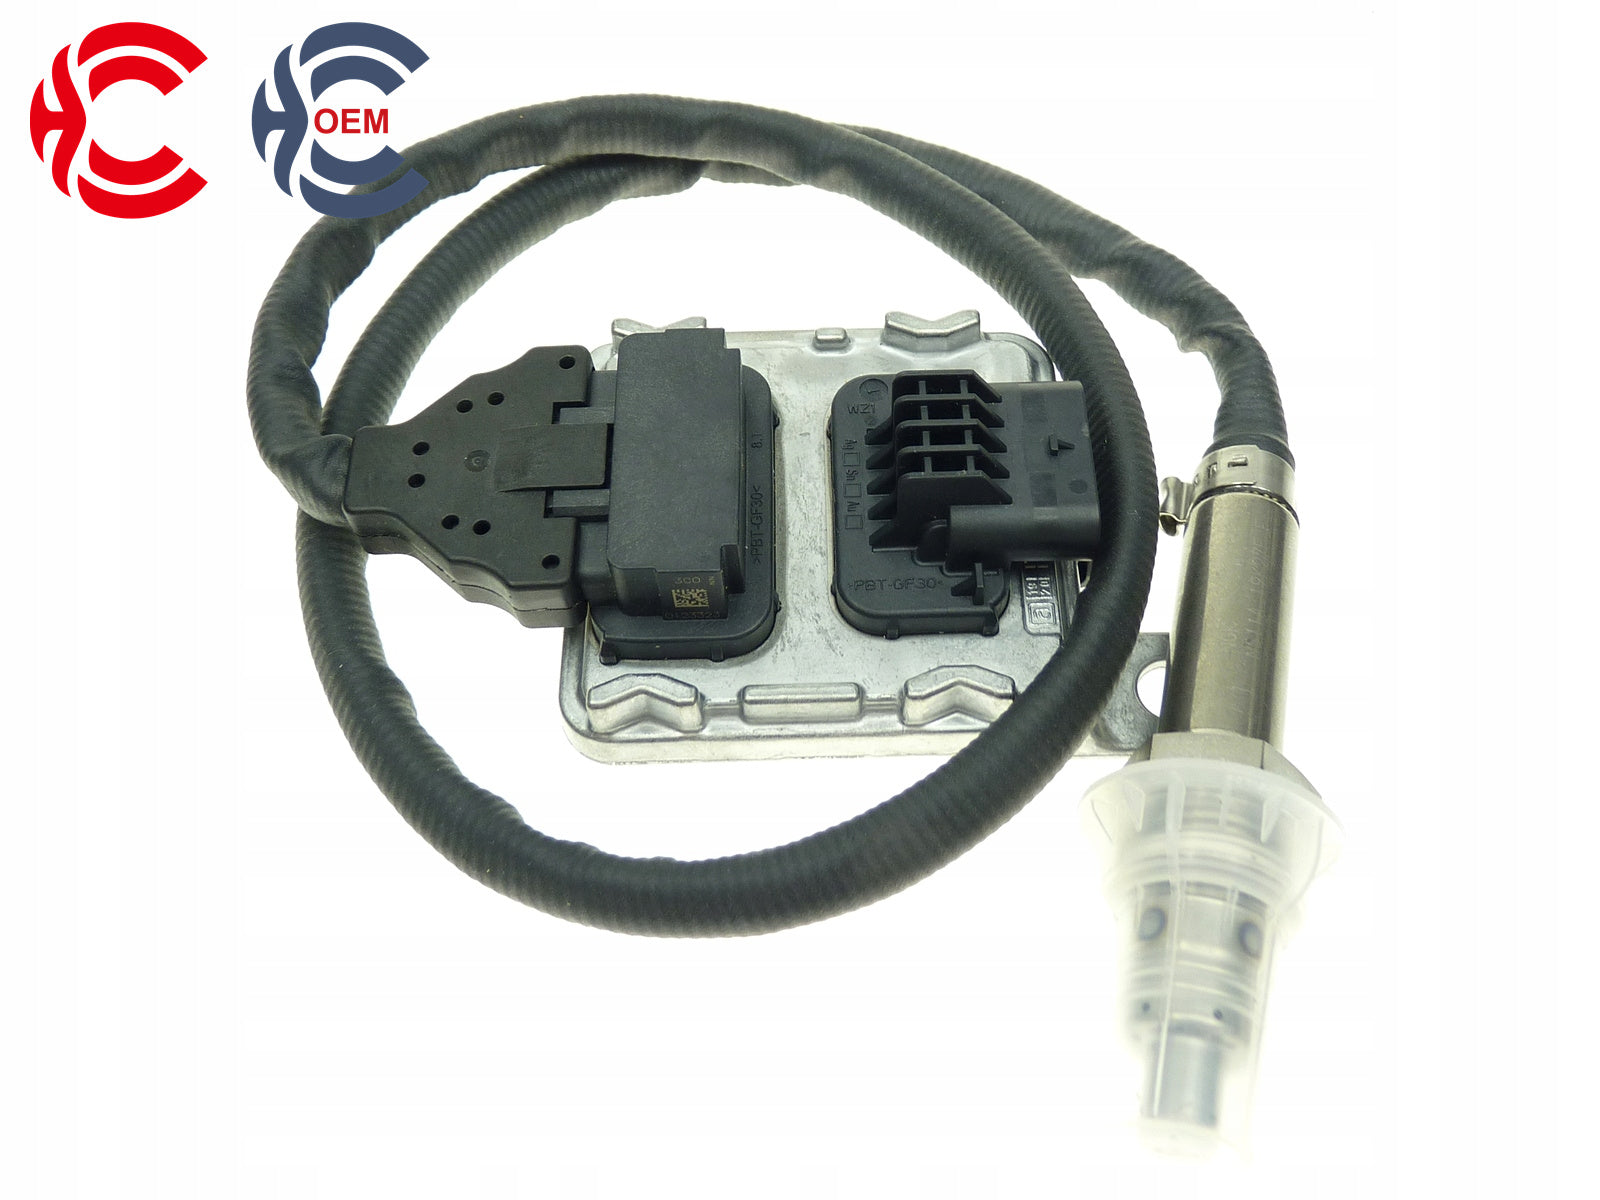 OEM: SNS 813 29650-2U100Material: ABS metalColor: black silverOrigin: Made in ChinaWeight: 400gPacking List: 1* Nitrogen oxide sensor NOx More ServiceWe can provide OEM Manufacturing serviceWe can Be your one-step solution for Auto PartsWe can provide technical scheme for you Feel Free to Contact Us, We will get back to you as soon as possible.